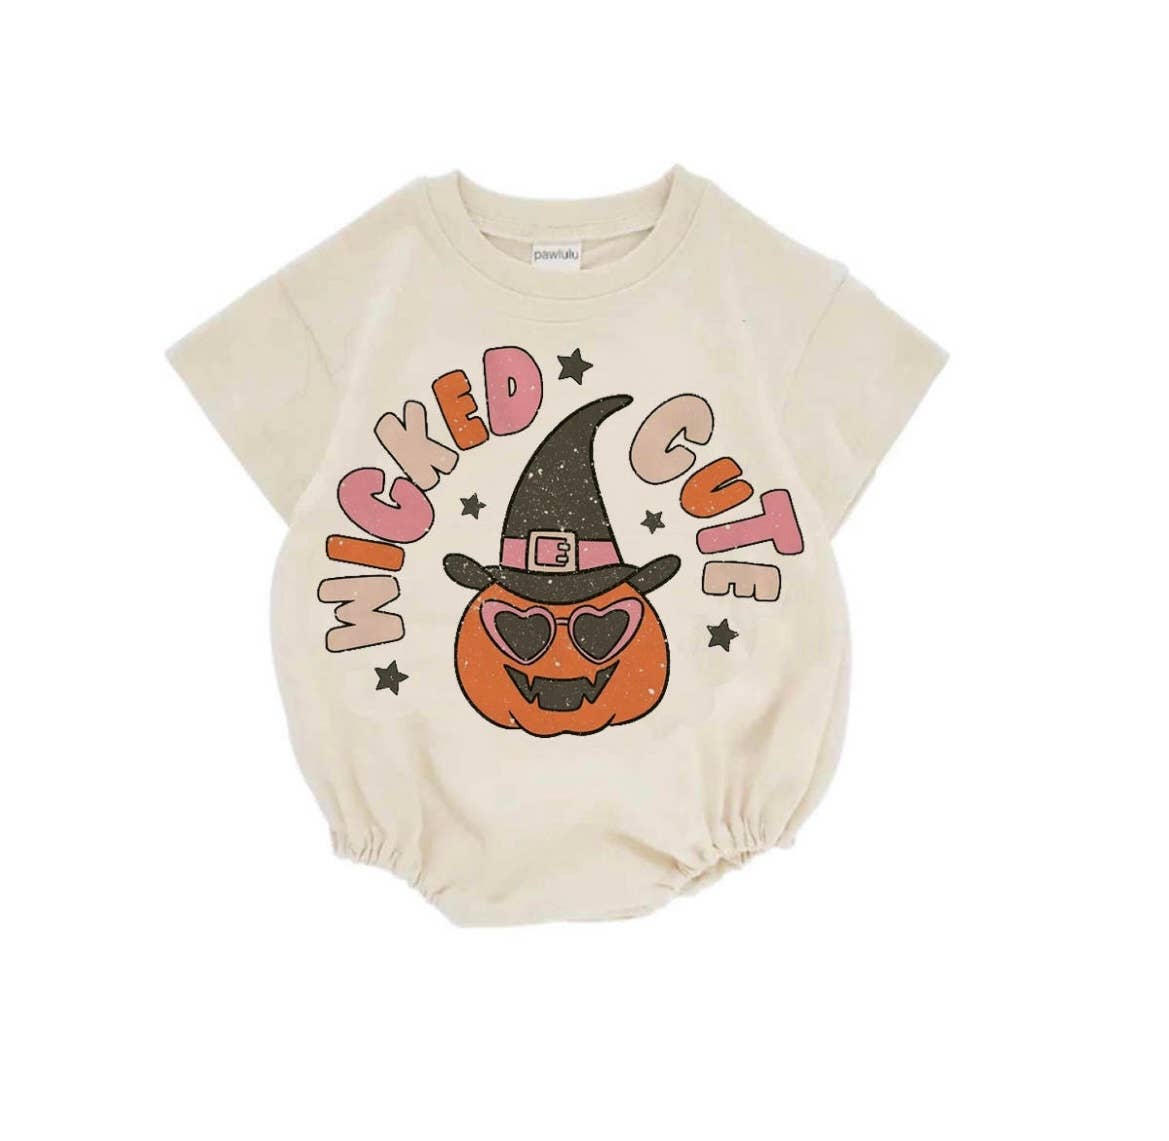 Boho + Babe - Wicked Cute Baby/Toddler Halloween Romper